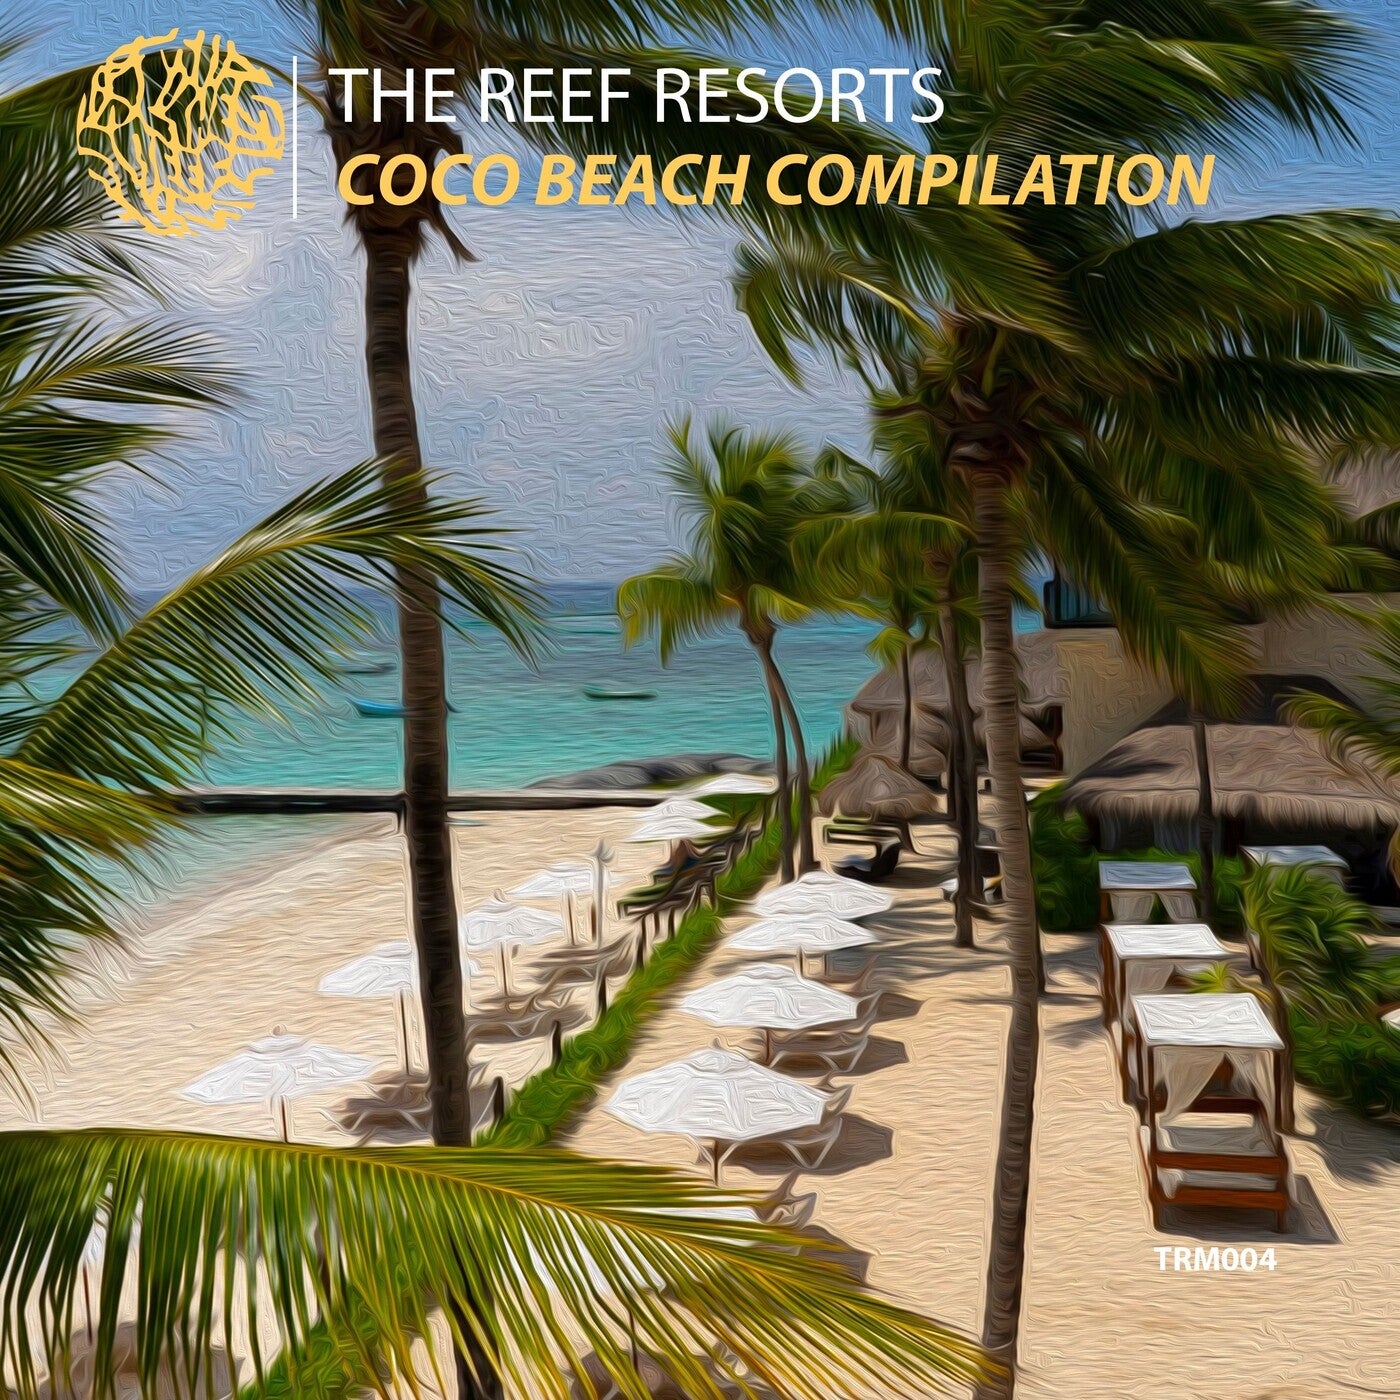 The Reef Resorts: Coco Beach Compilation